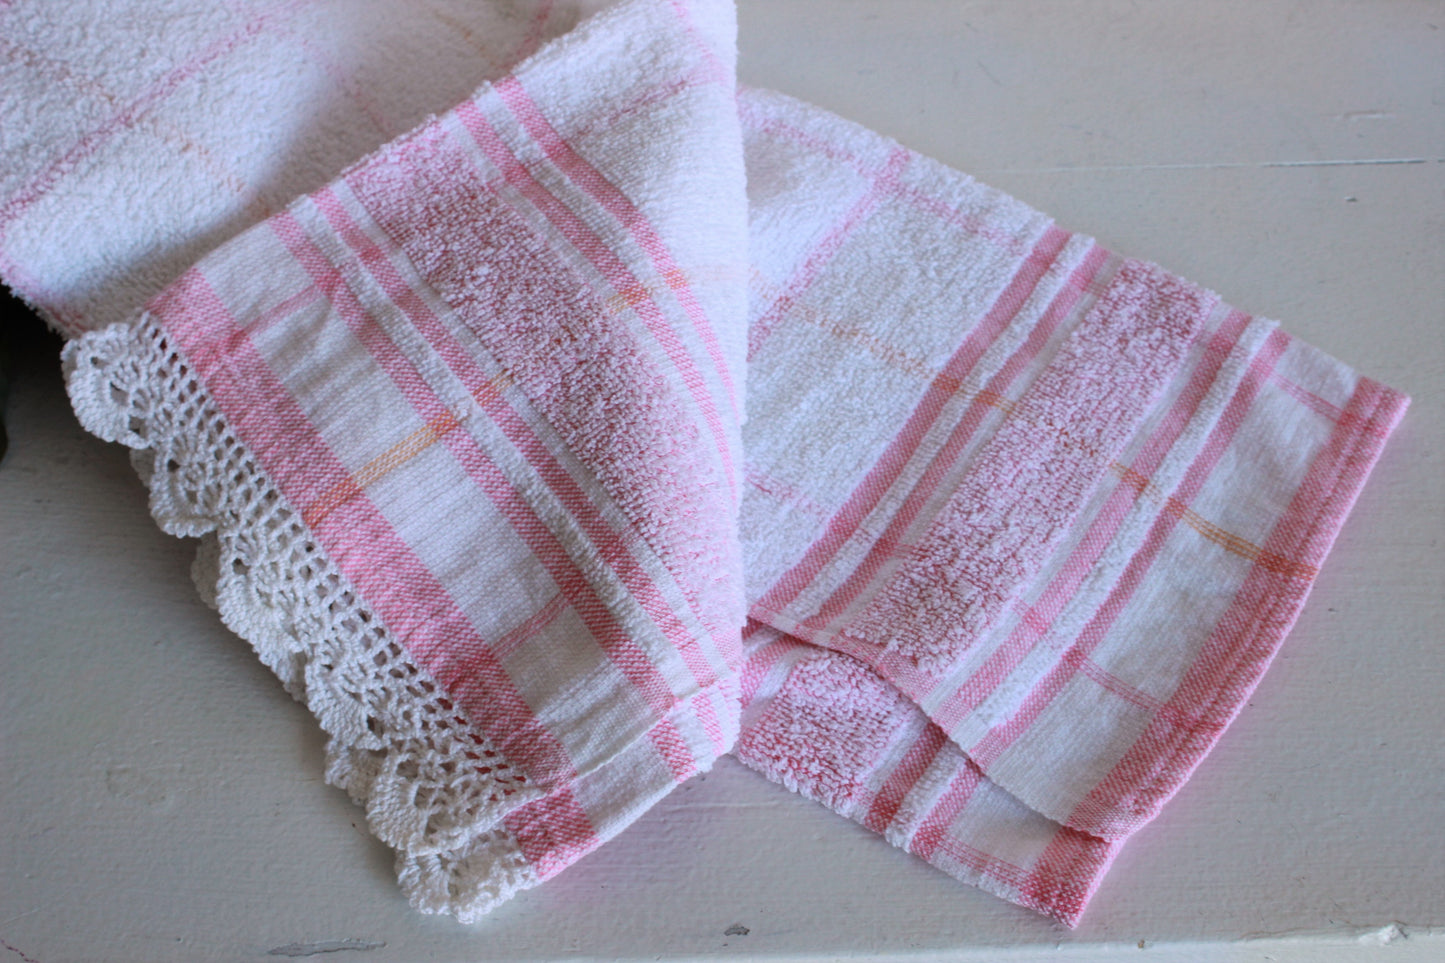 Vintage 1980s Cannon Terrycloth Towel With Crochet Lace Trim